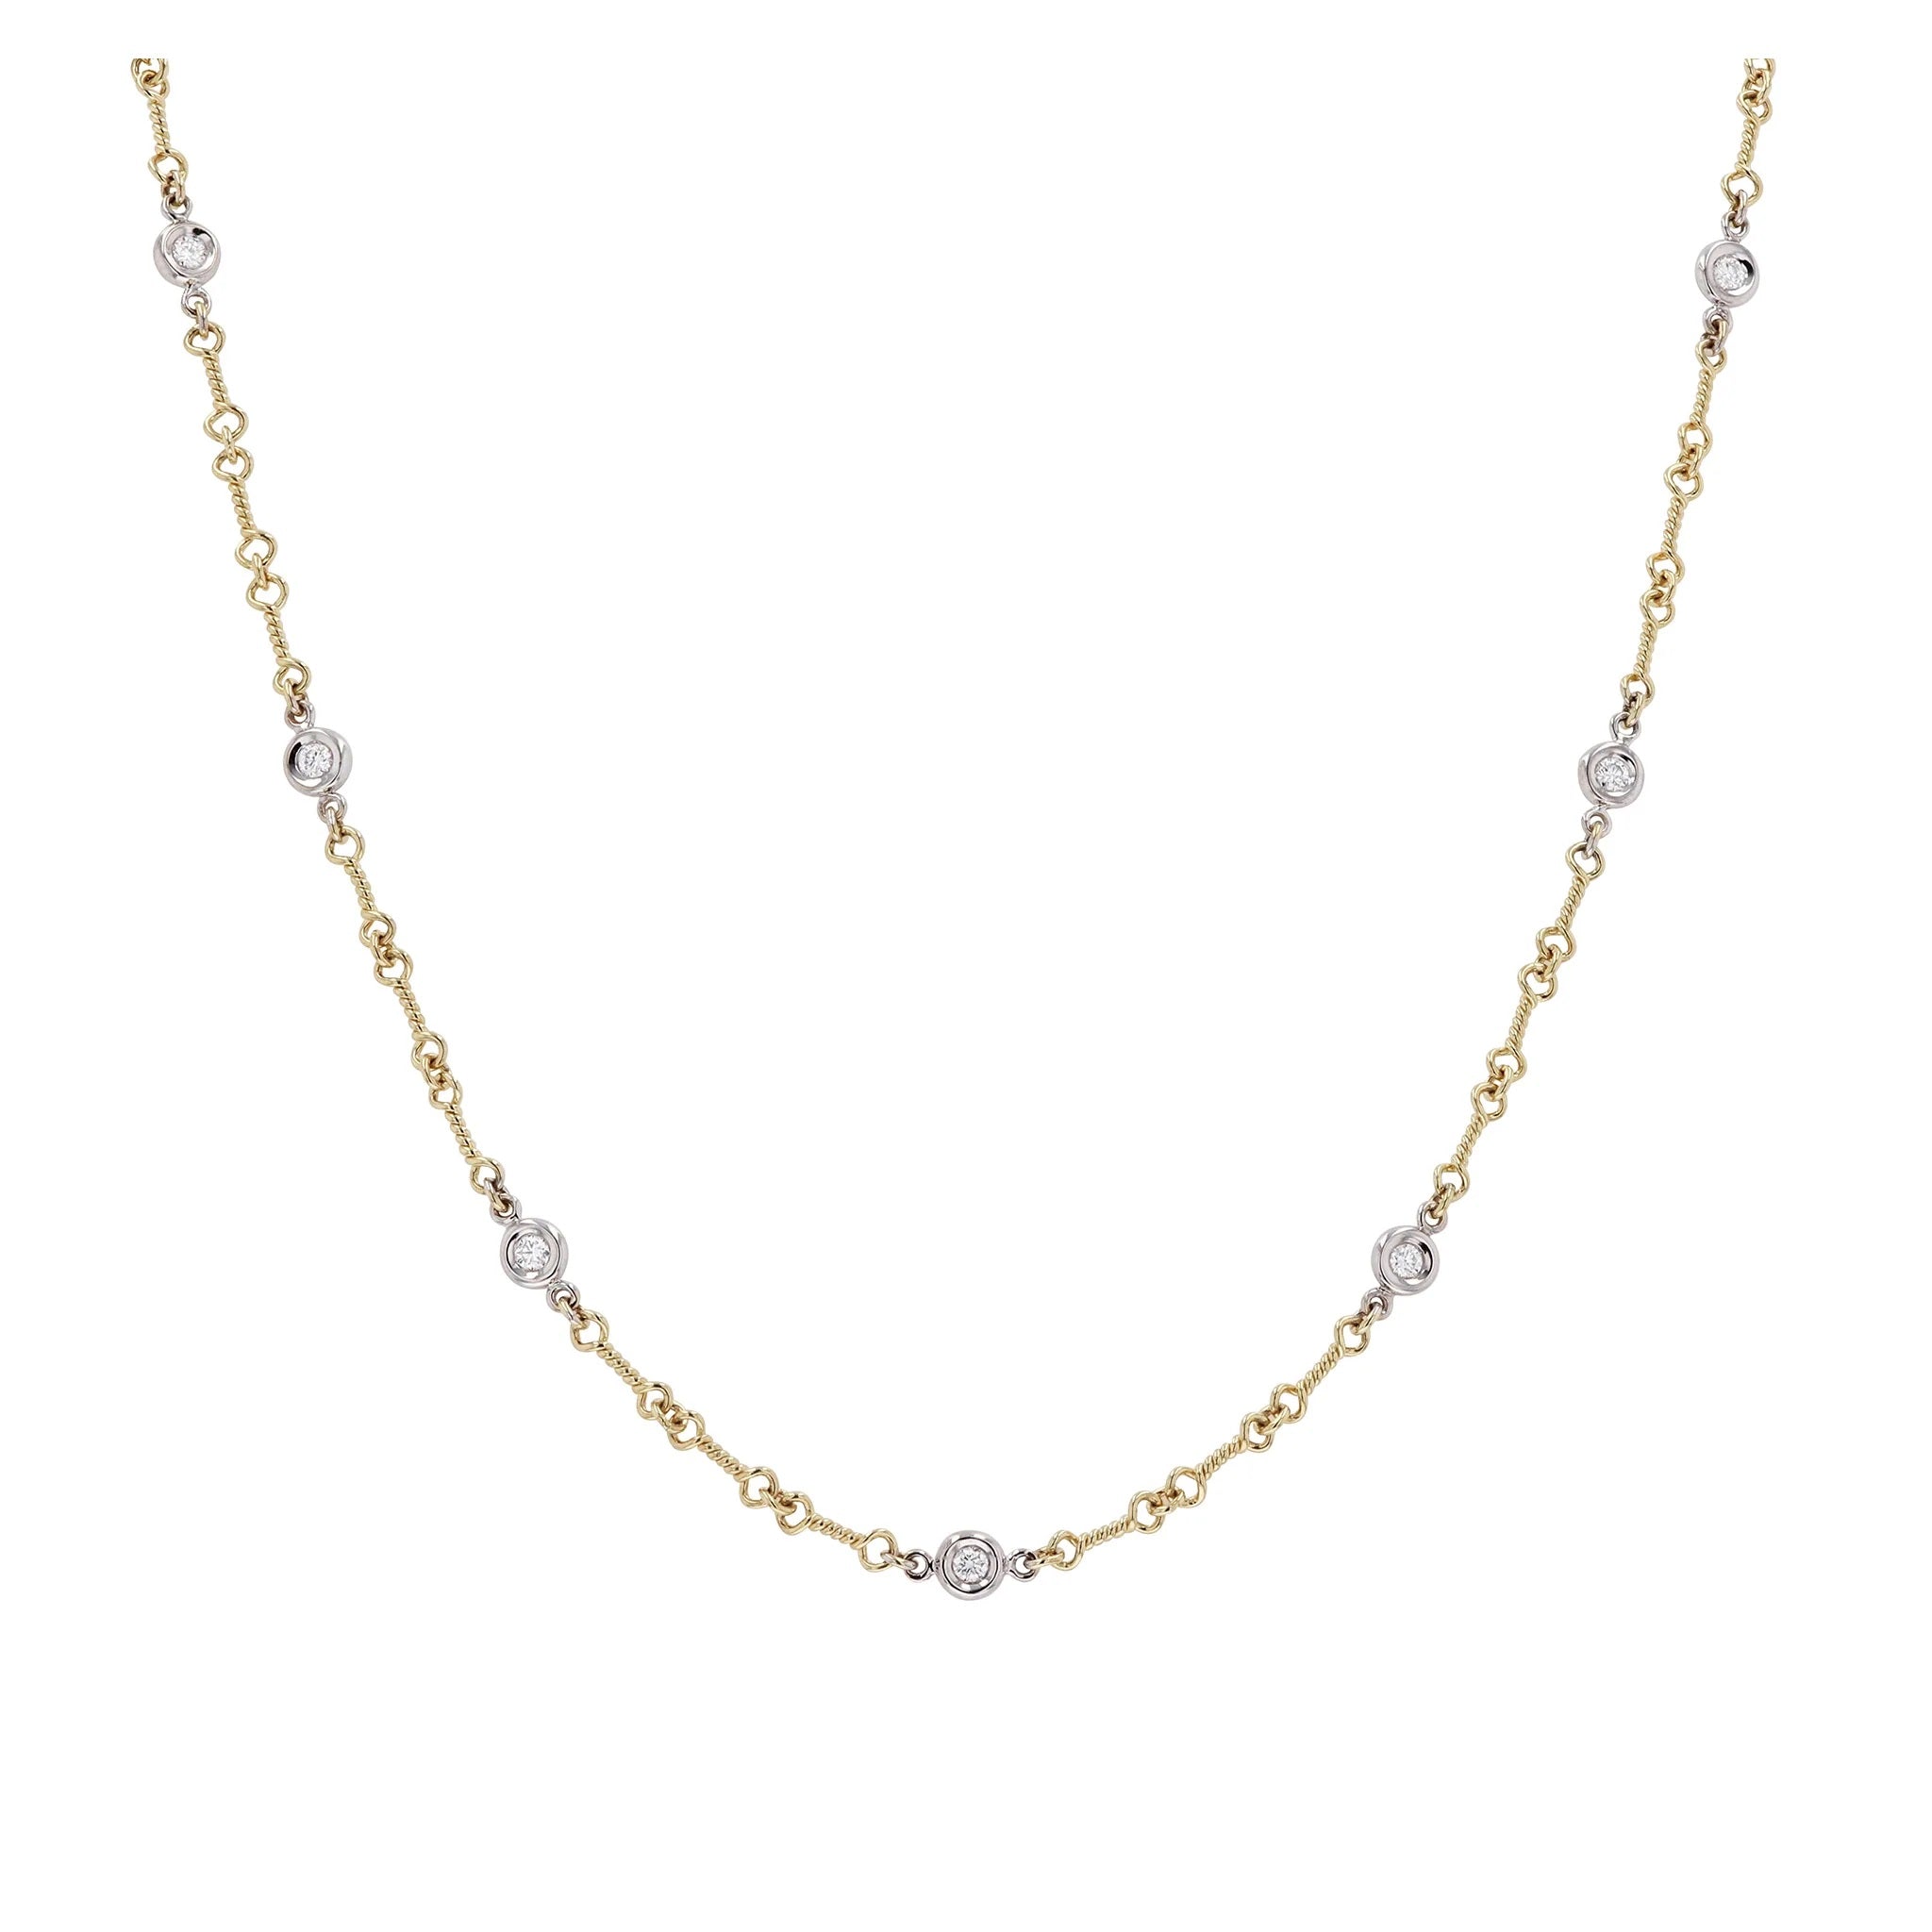 18K YELLOW AND WHITE GOLD 0.28CT SI/G DIAMOND STATION NECKLACE ON A DOGBONE LINK CHAIN FROM THE DIAMONDS BY THE INCH COLLECTION